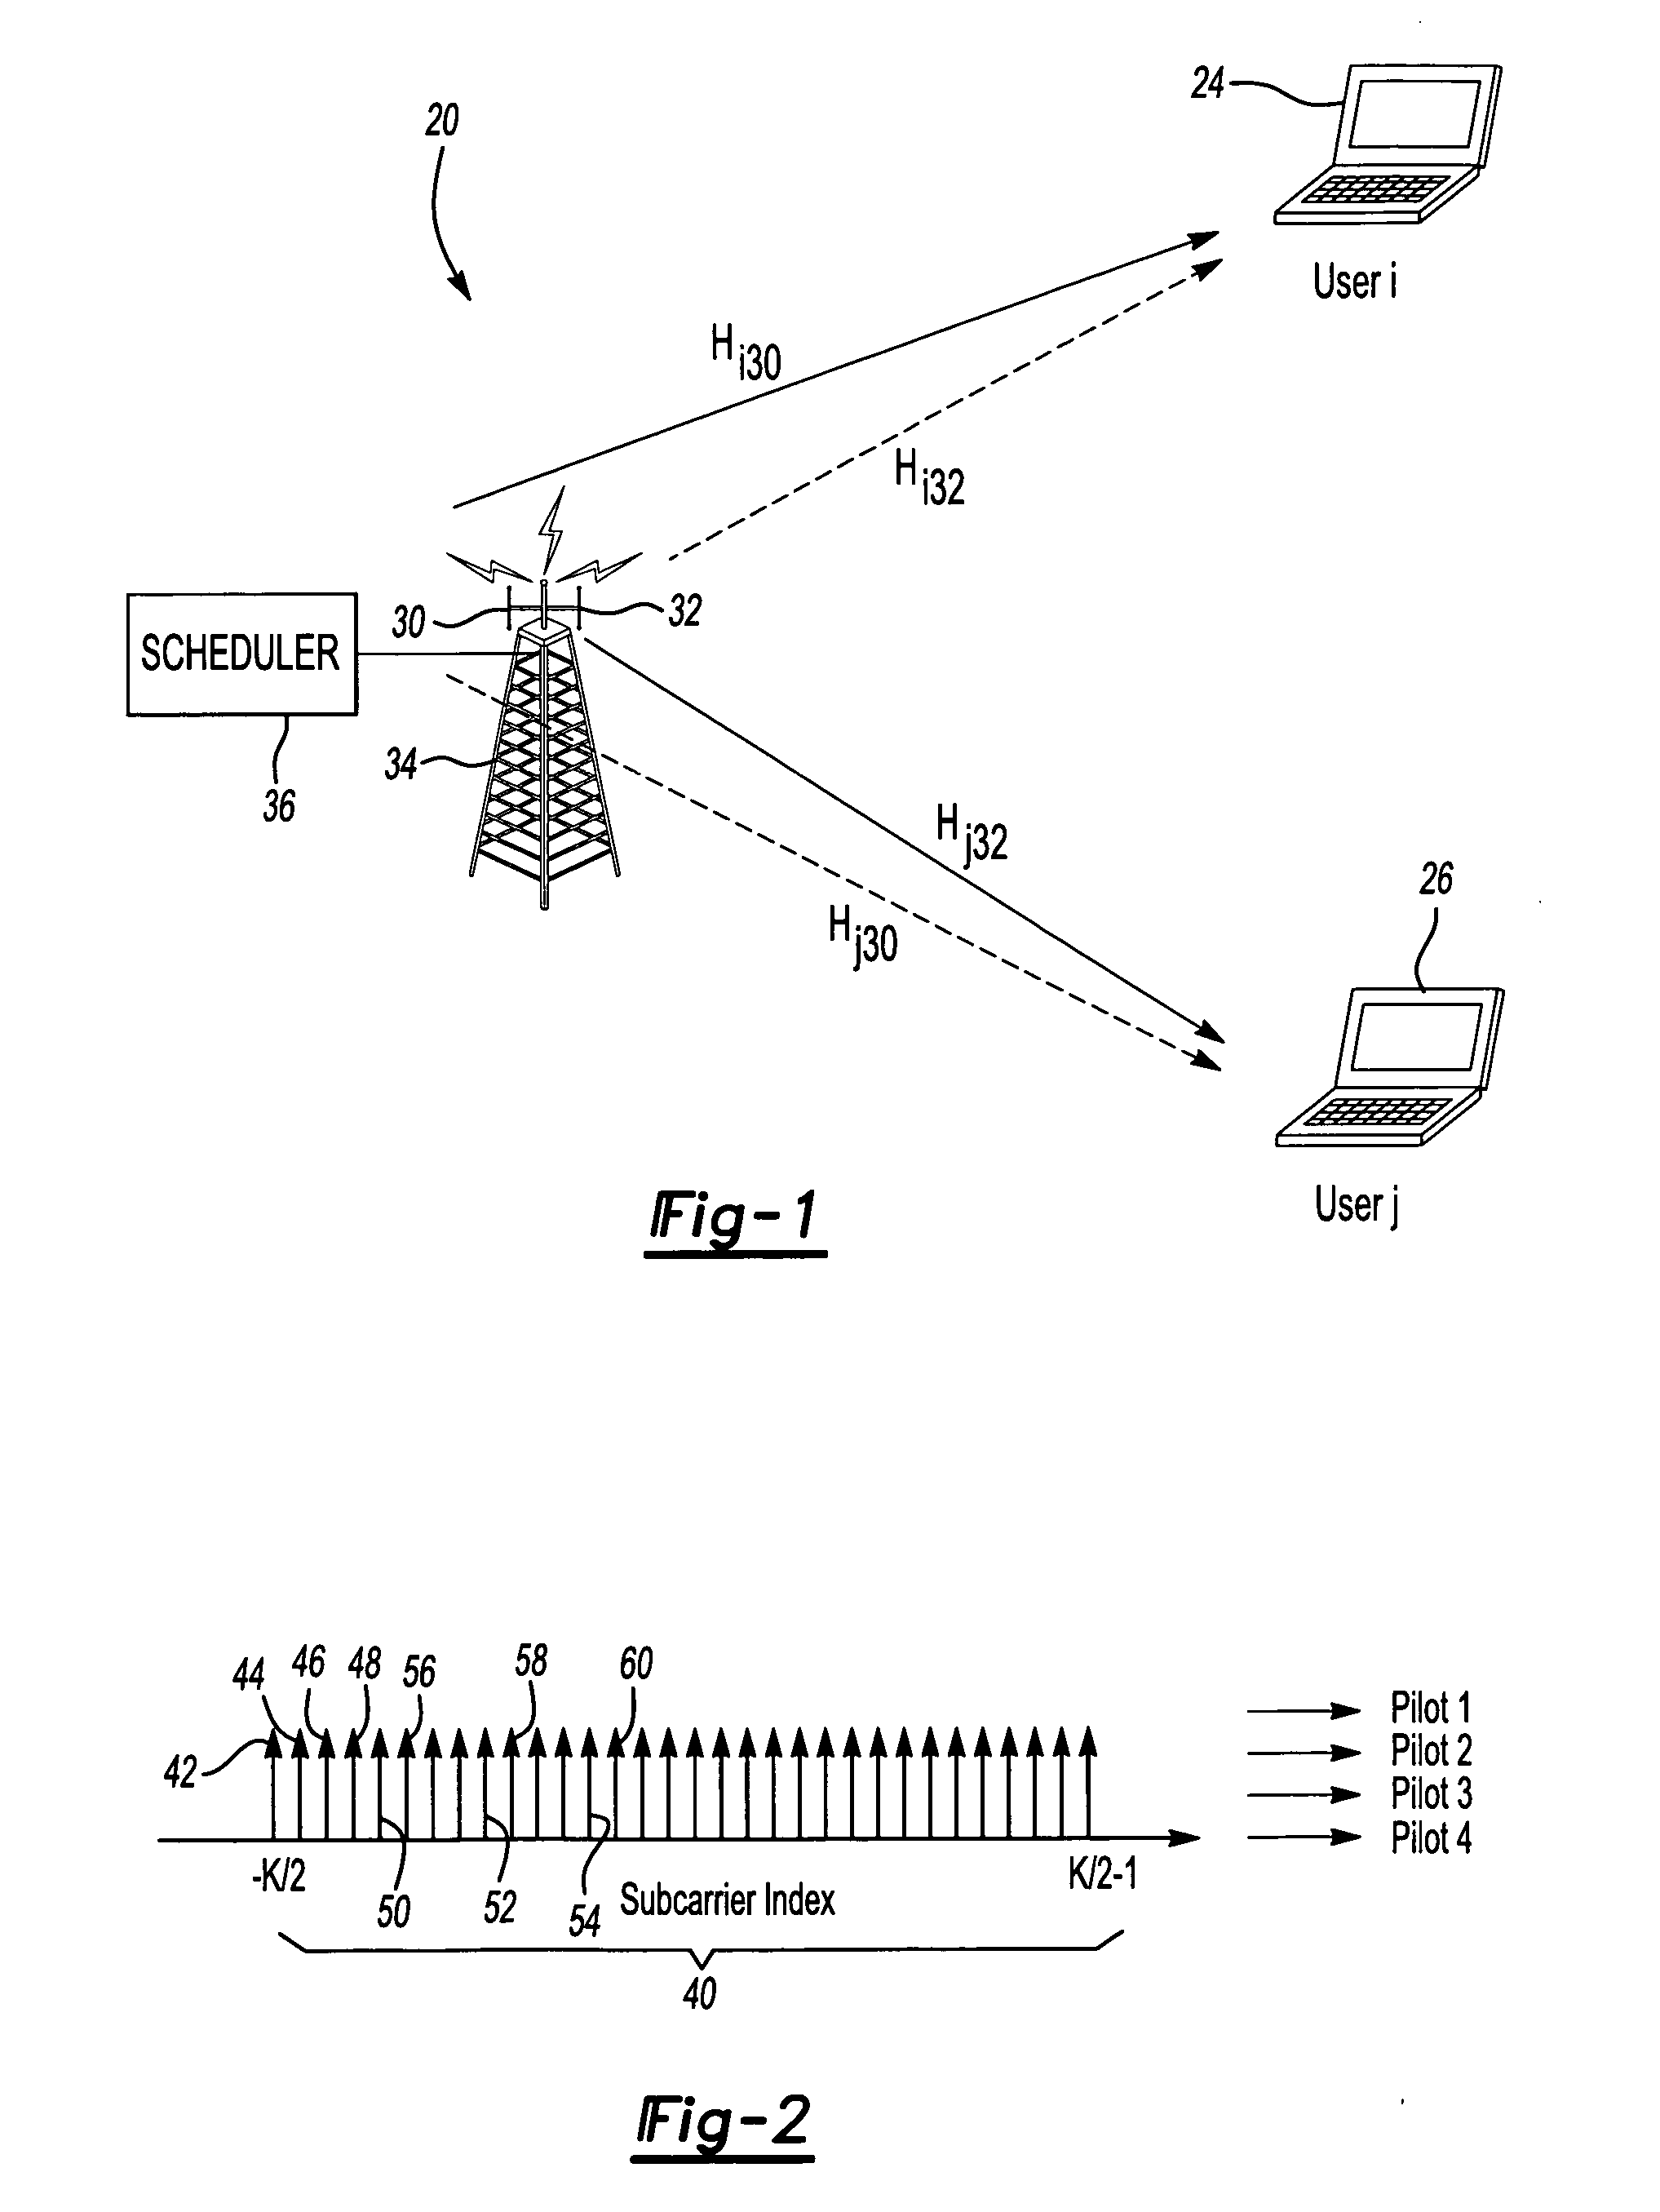 Distributed multiple antenna scheduling for wireless packet data communication system using OFDM